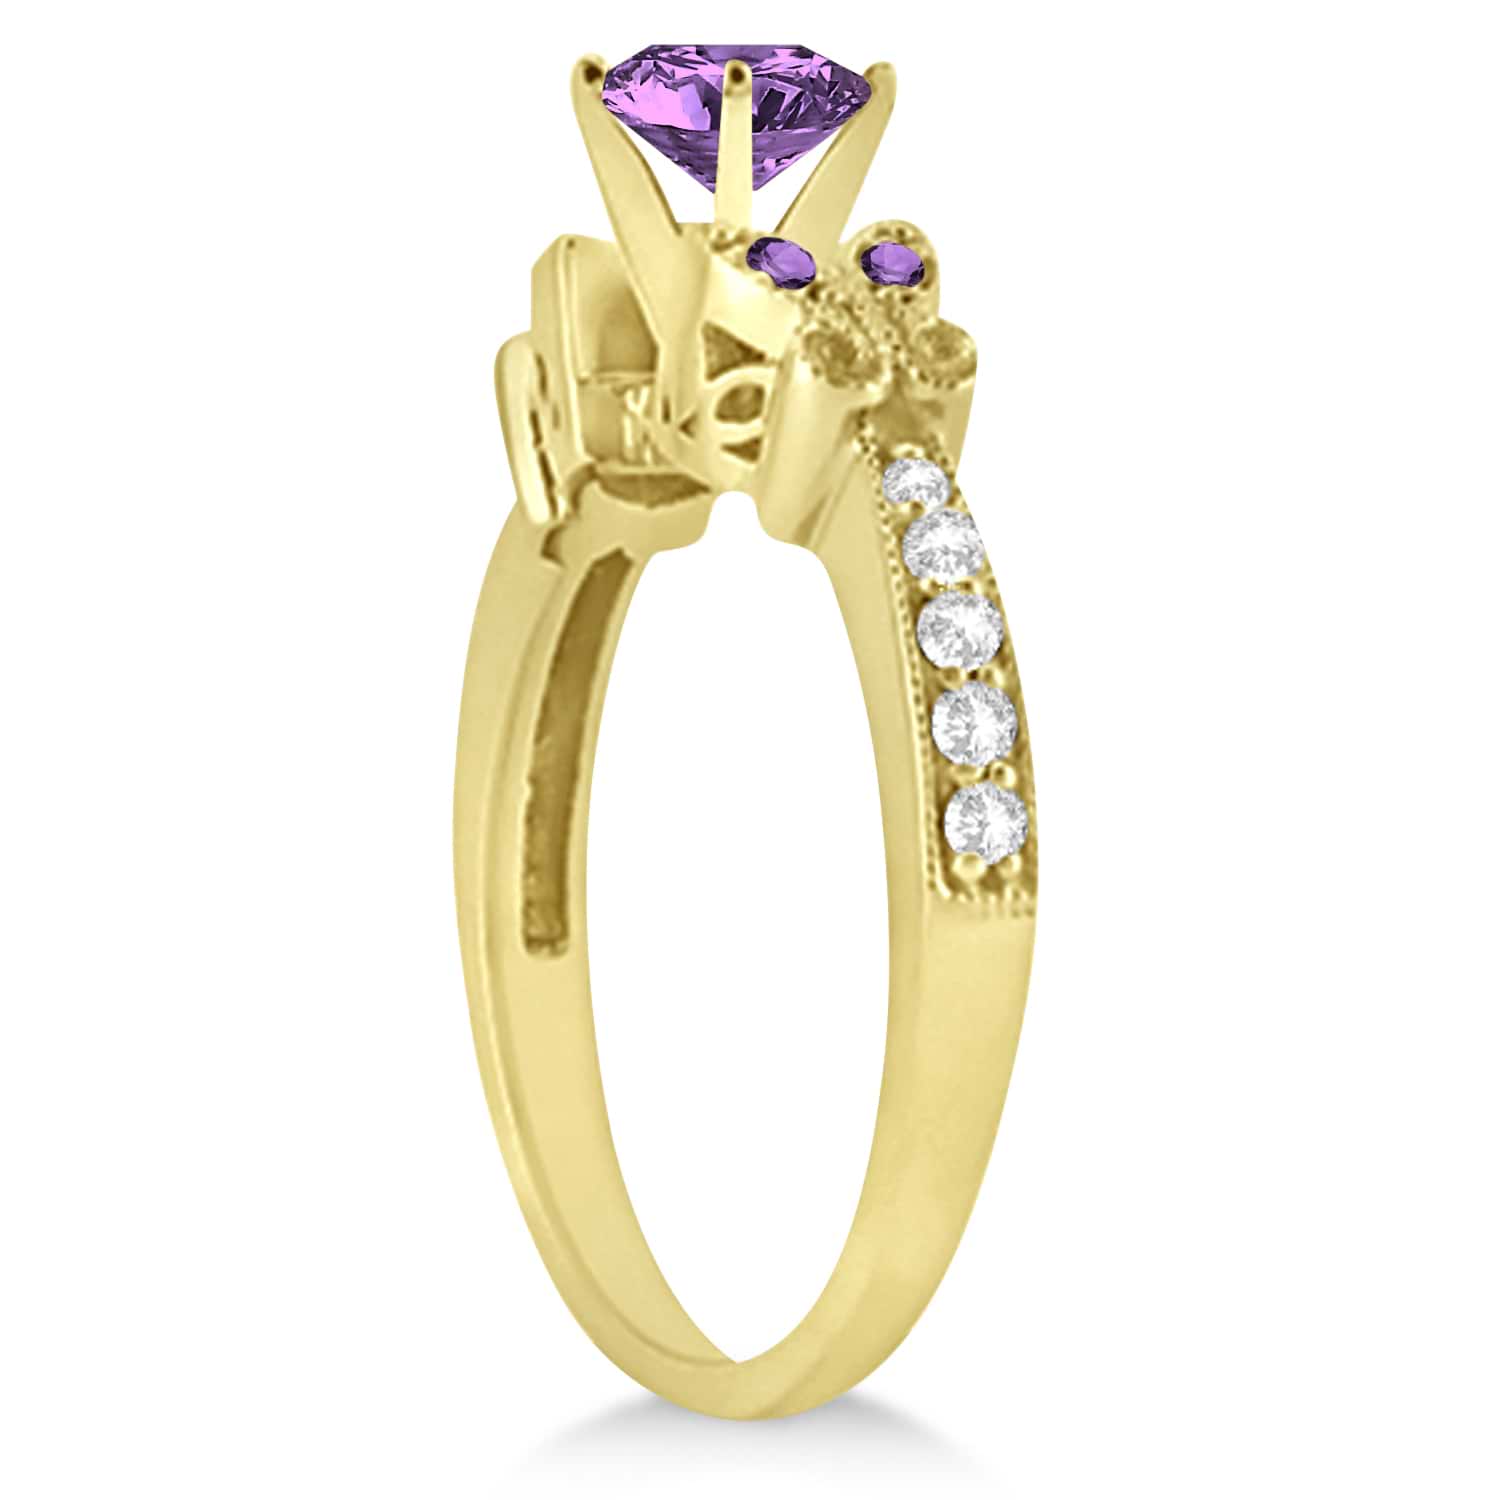 Butterfly Amethyst & Diamond Engagement Ring 14K Yellow Gold 1.28ctw